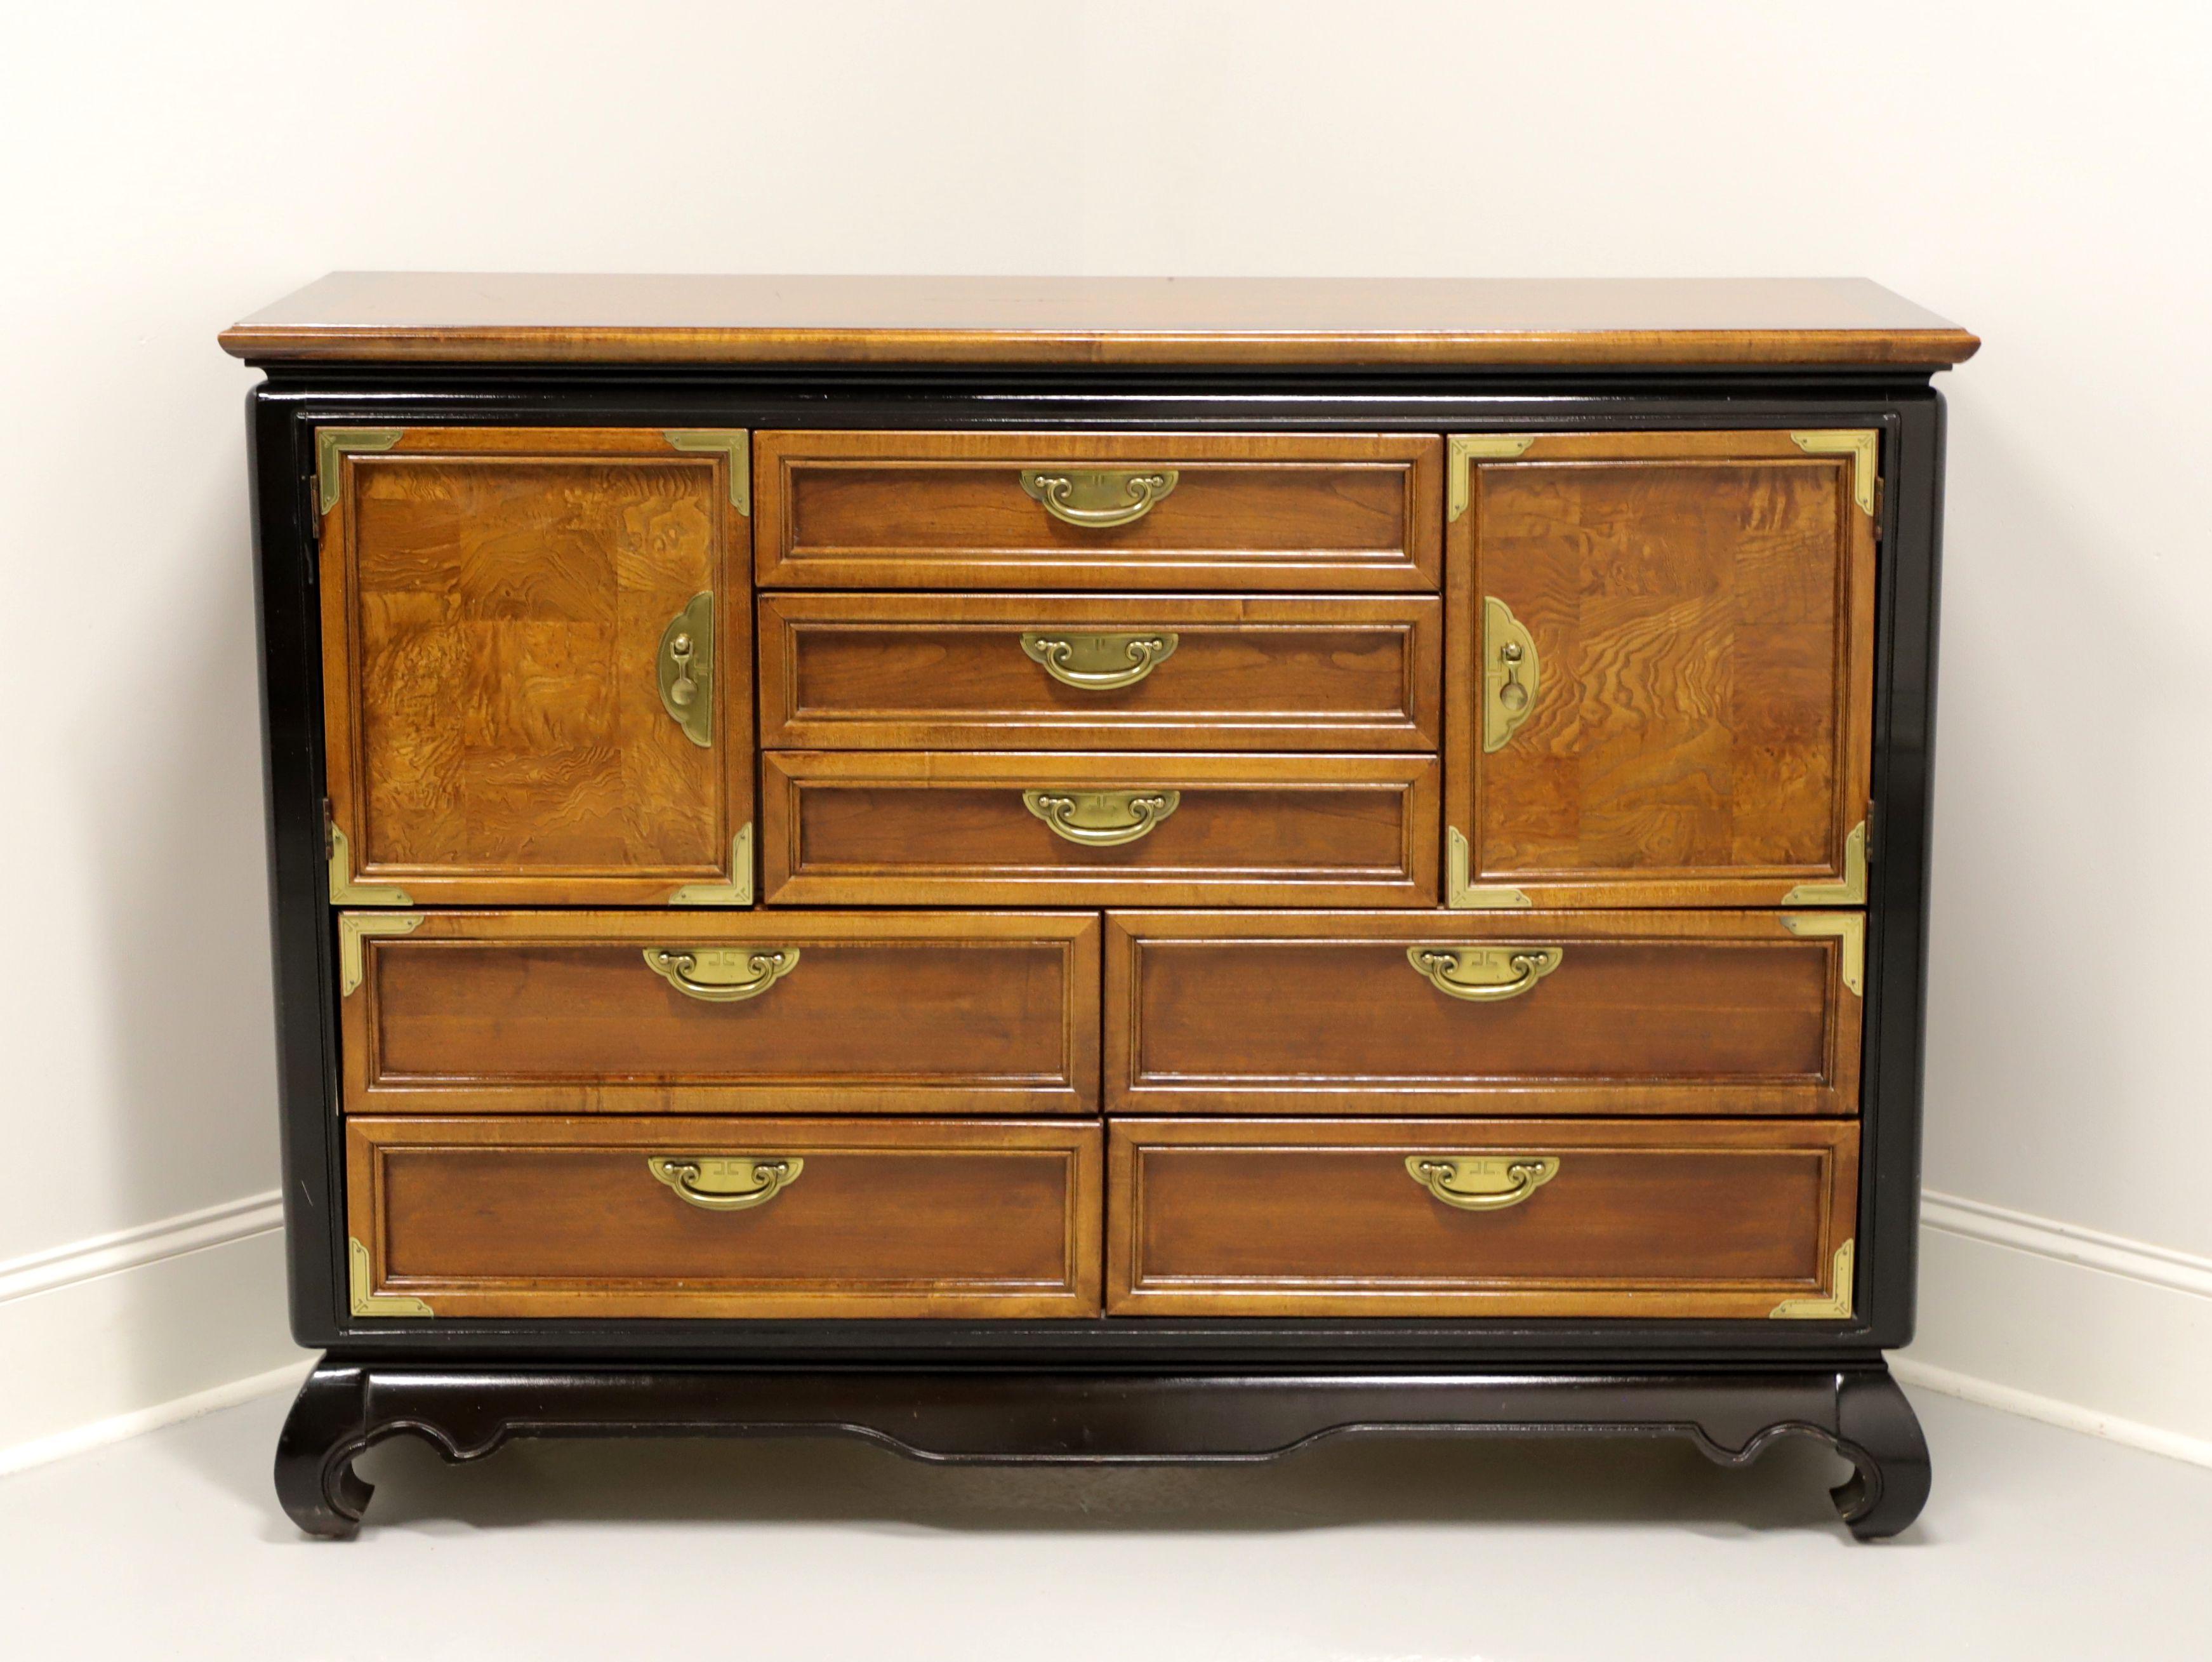 An Asian Ming style dresser or credenza by Broyhill Premier, from their 